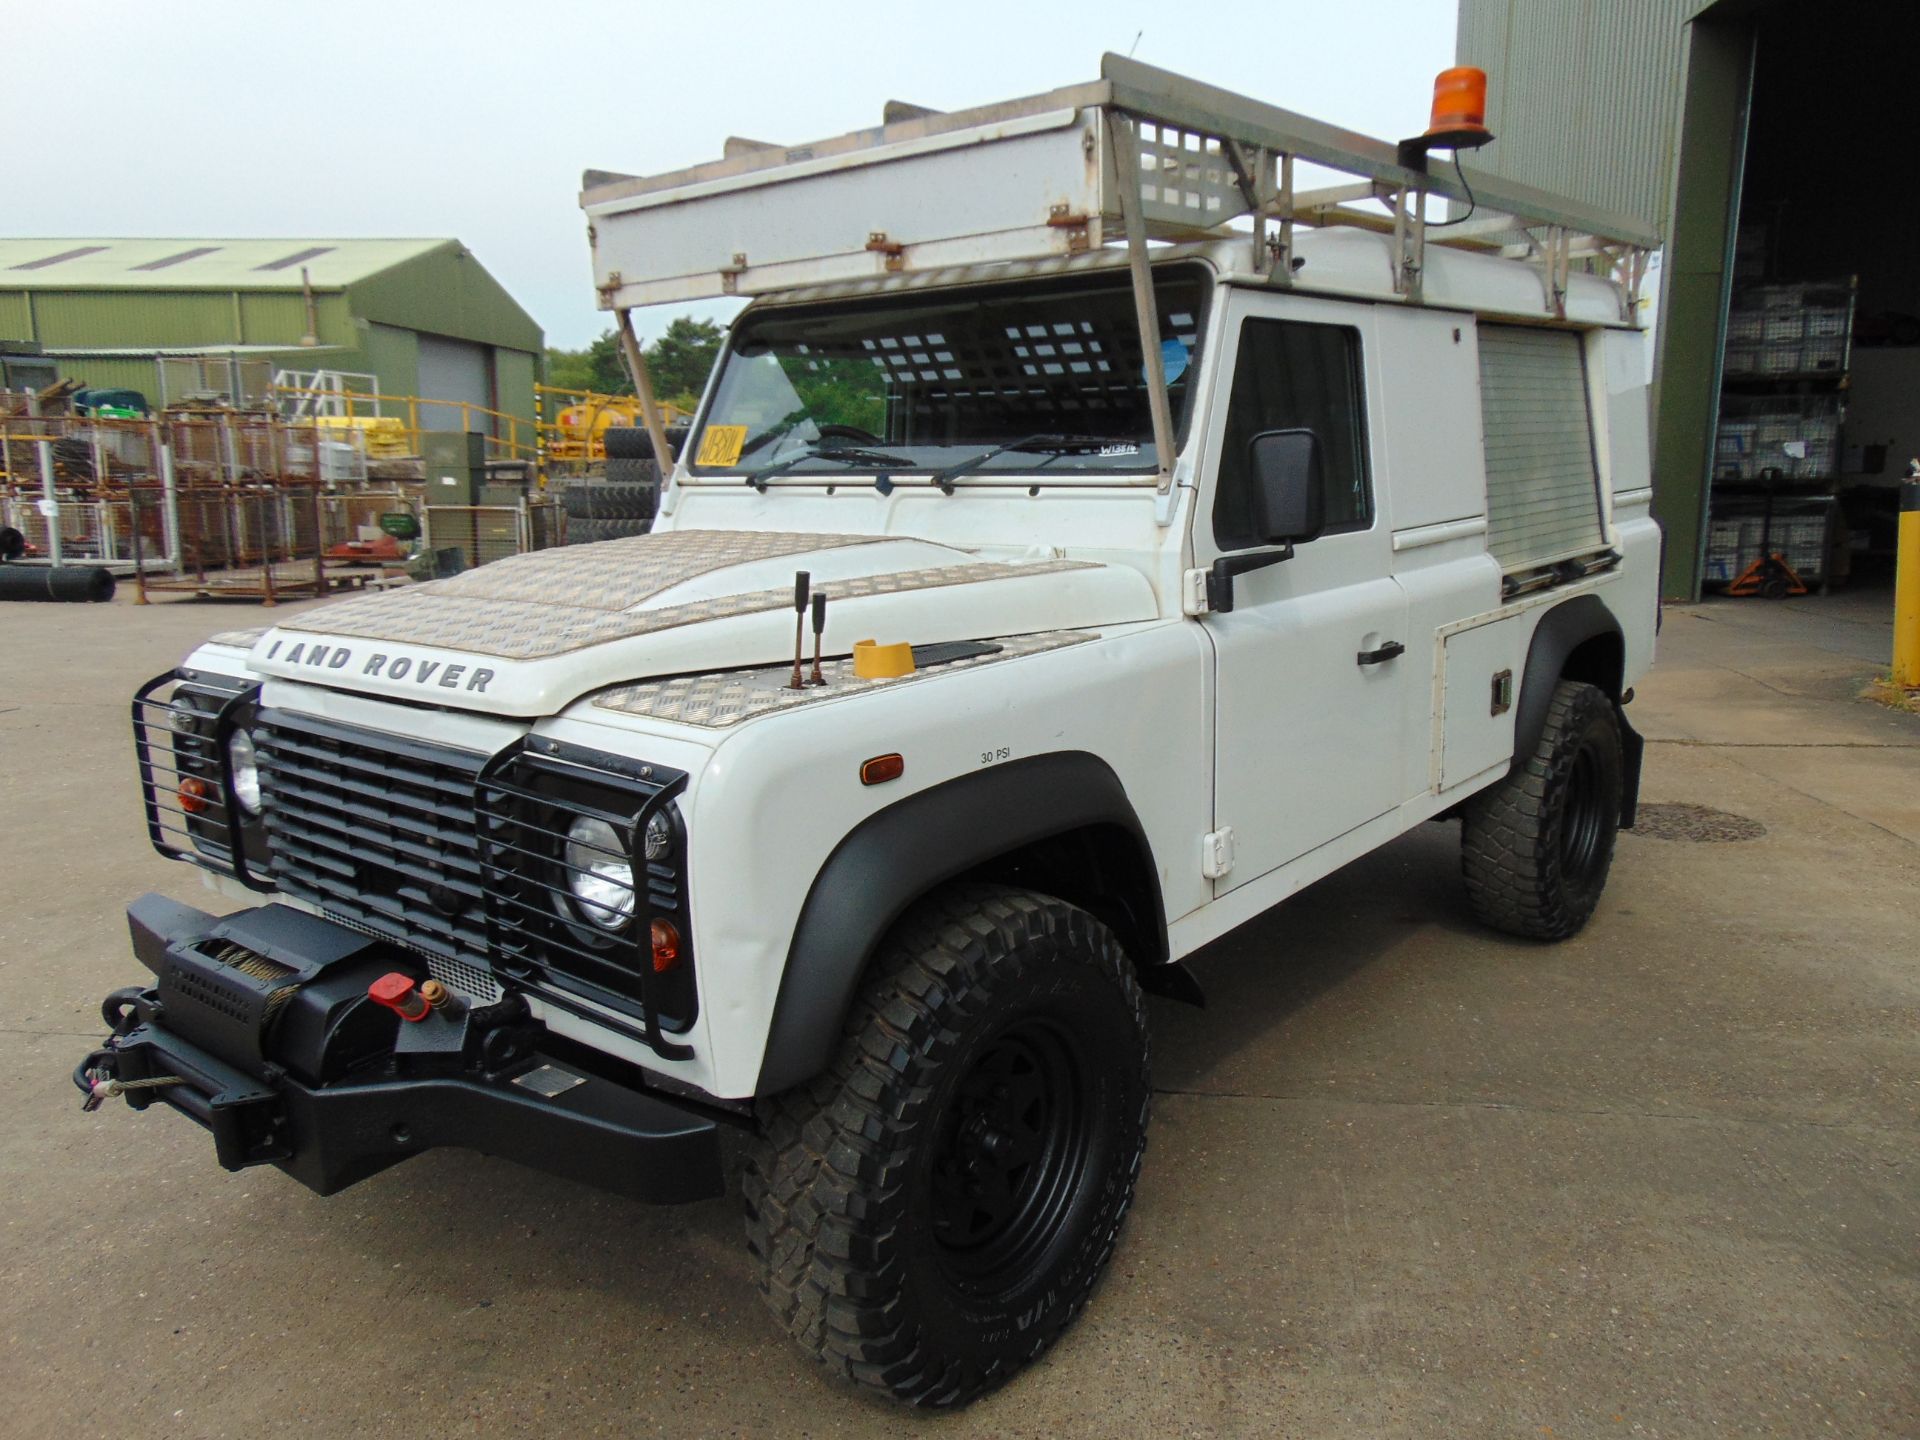 2013 Land Rover Defender 110 Puma hardtop 4x4 Utility vehicle (mobile workshop) with hydraulic winch - Image 4 of 44